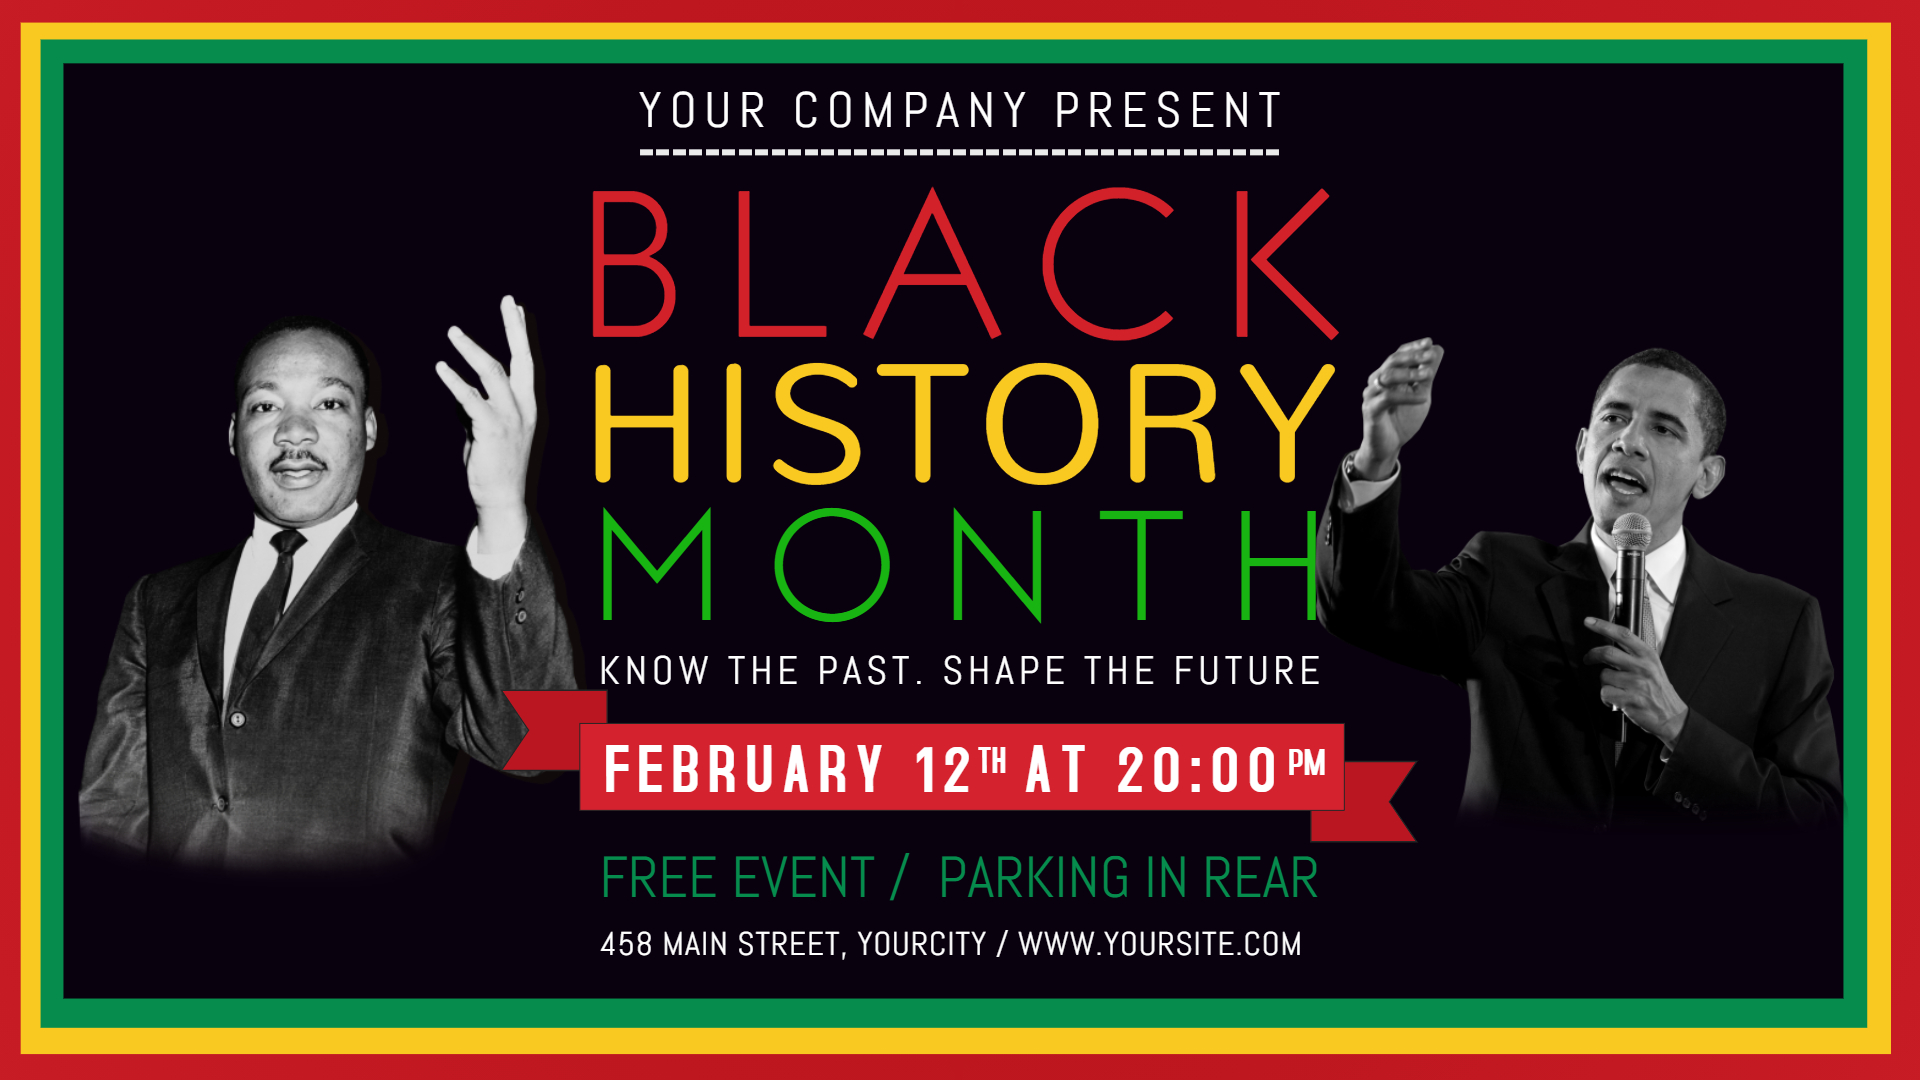 New Design Ideas for Promoting your Black History Month Event Design